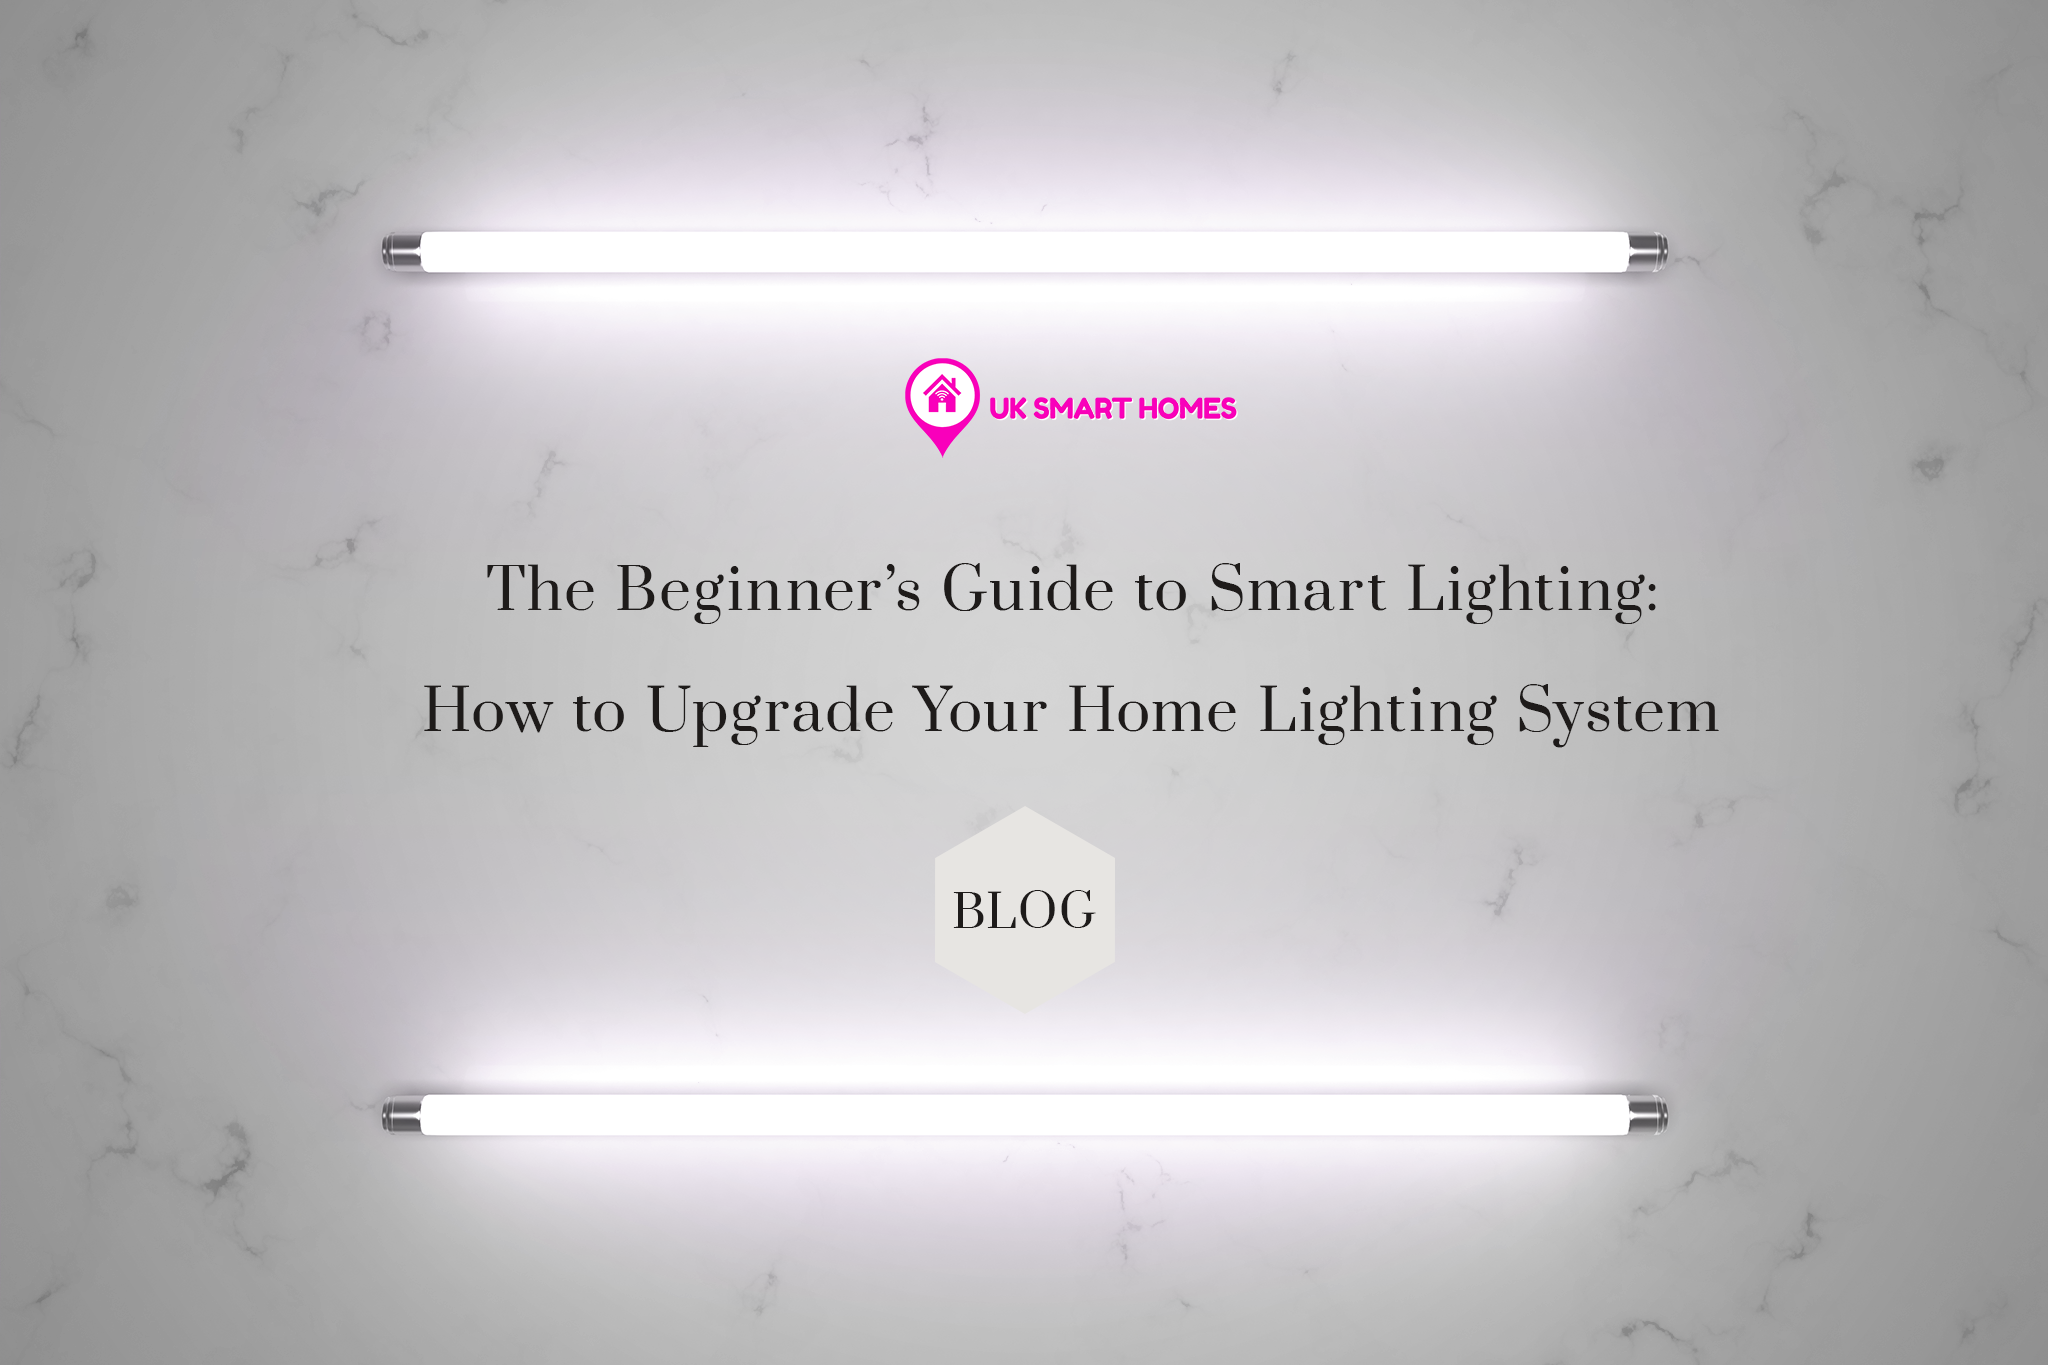 The Beginner’s Guide to Smart Lighting: How to Upgrade Your Home Lighting System